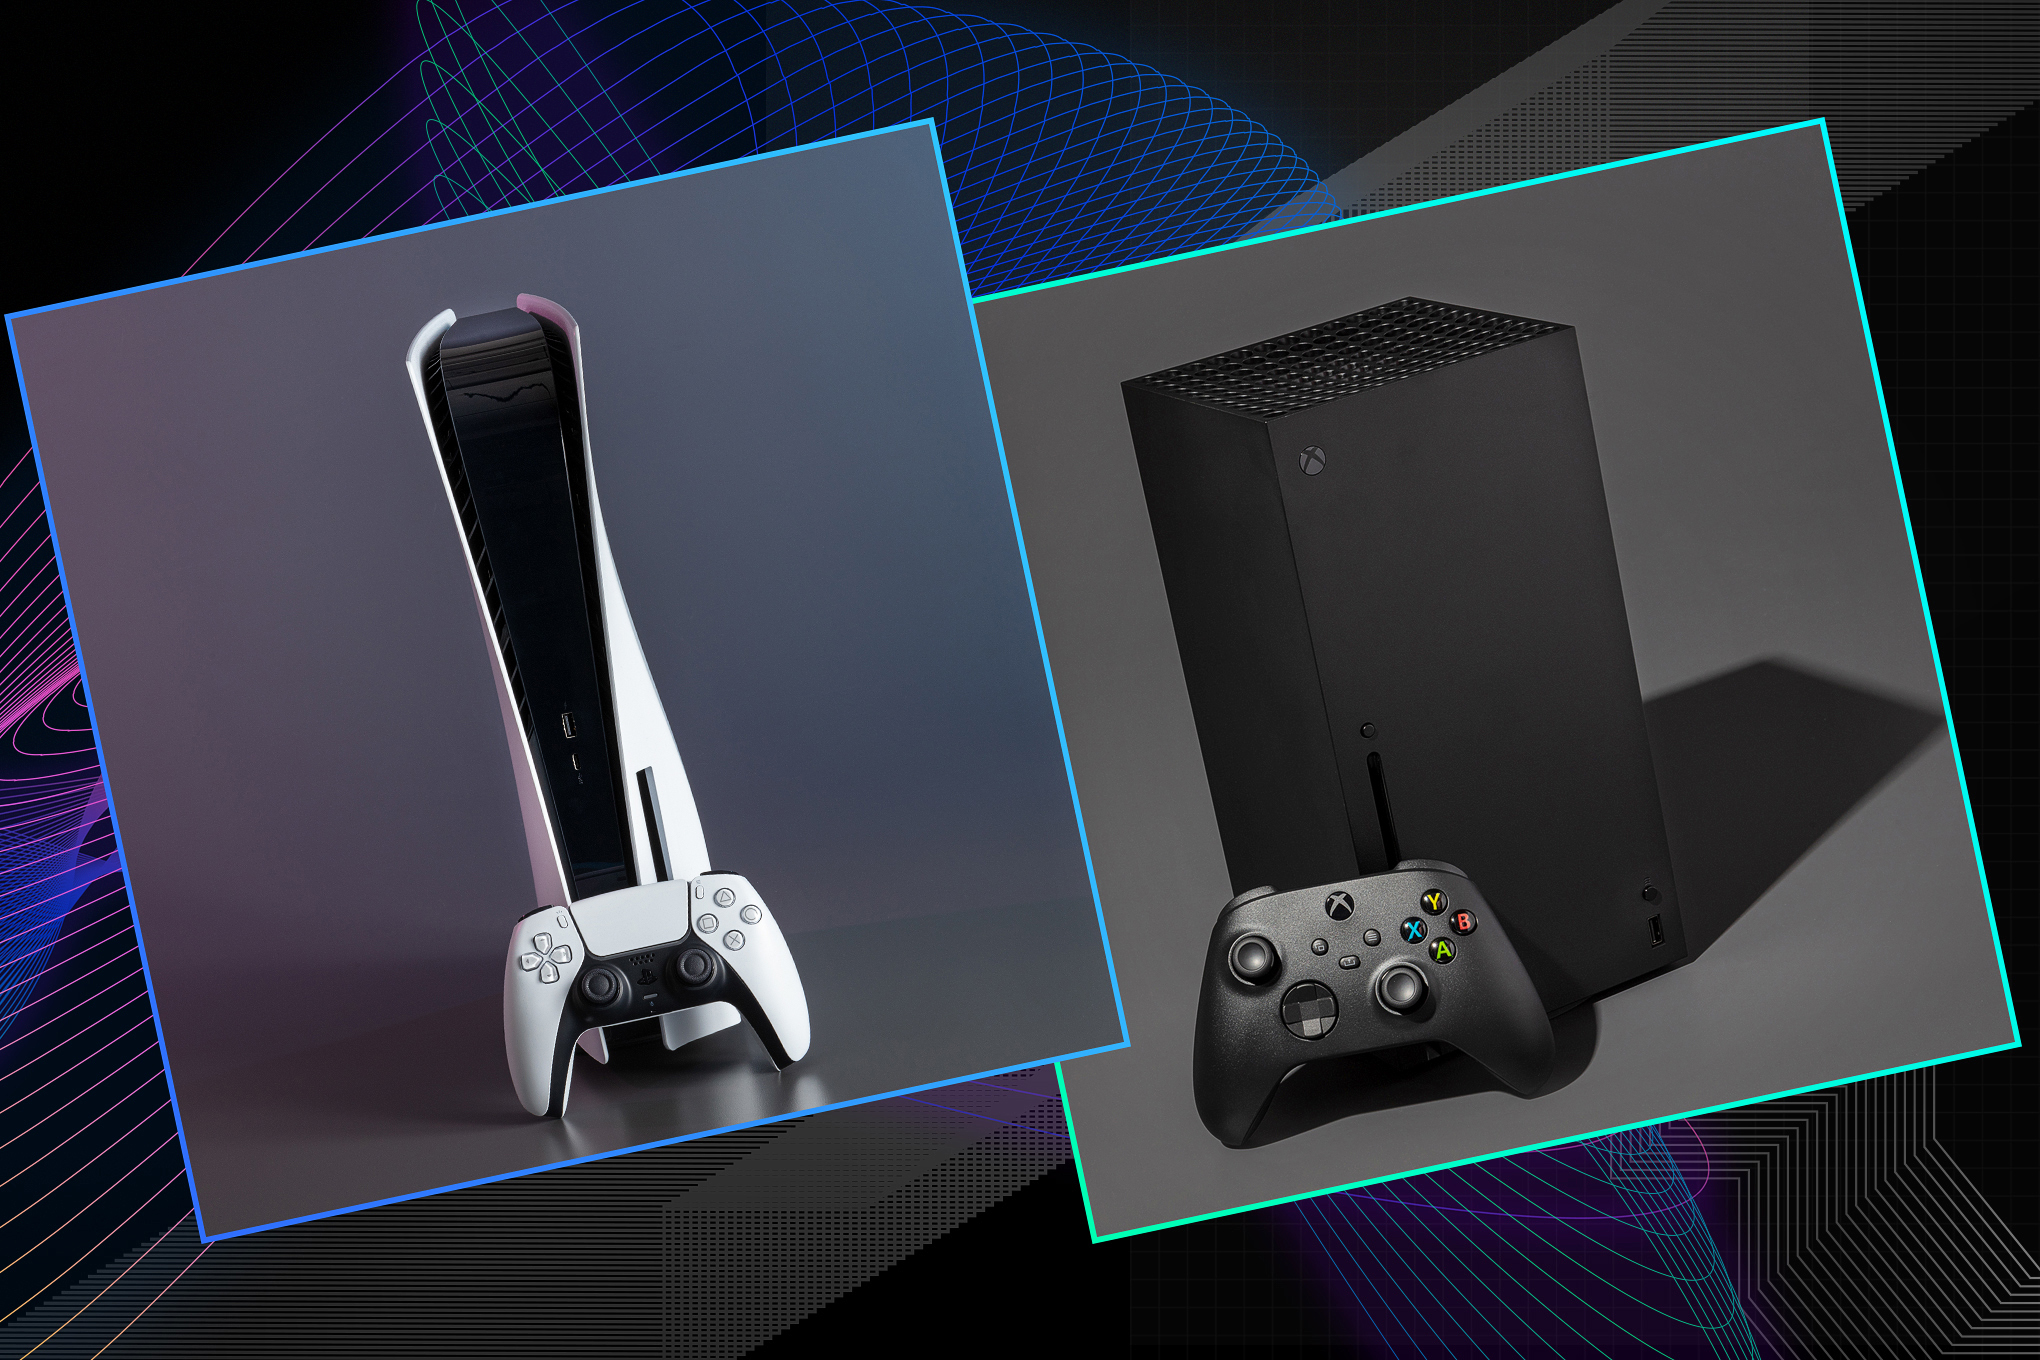 Graphic featuring the PS5 and Xbox Series X consoles